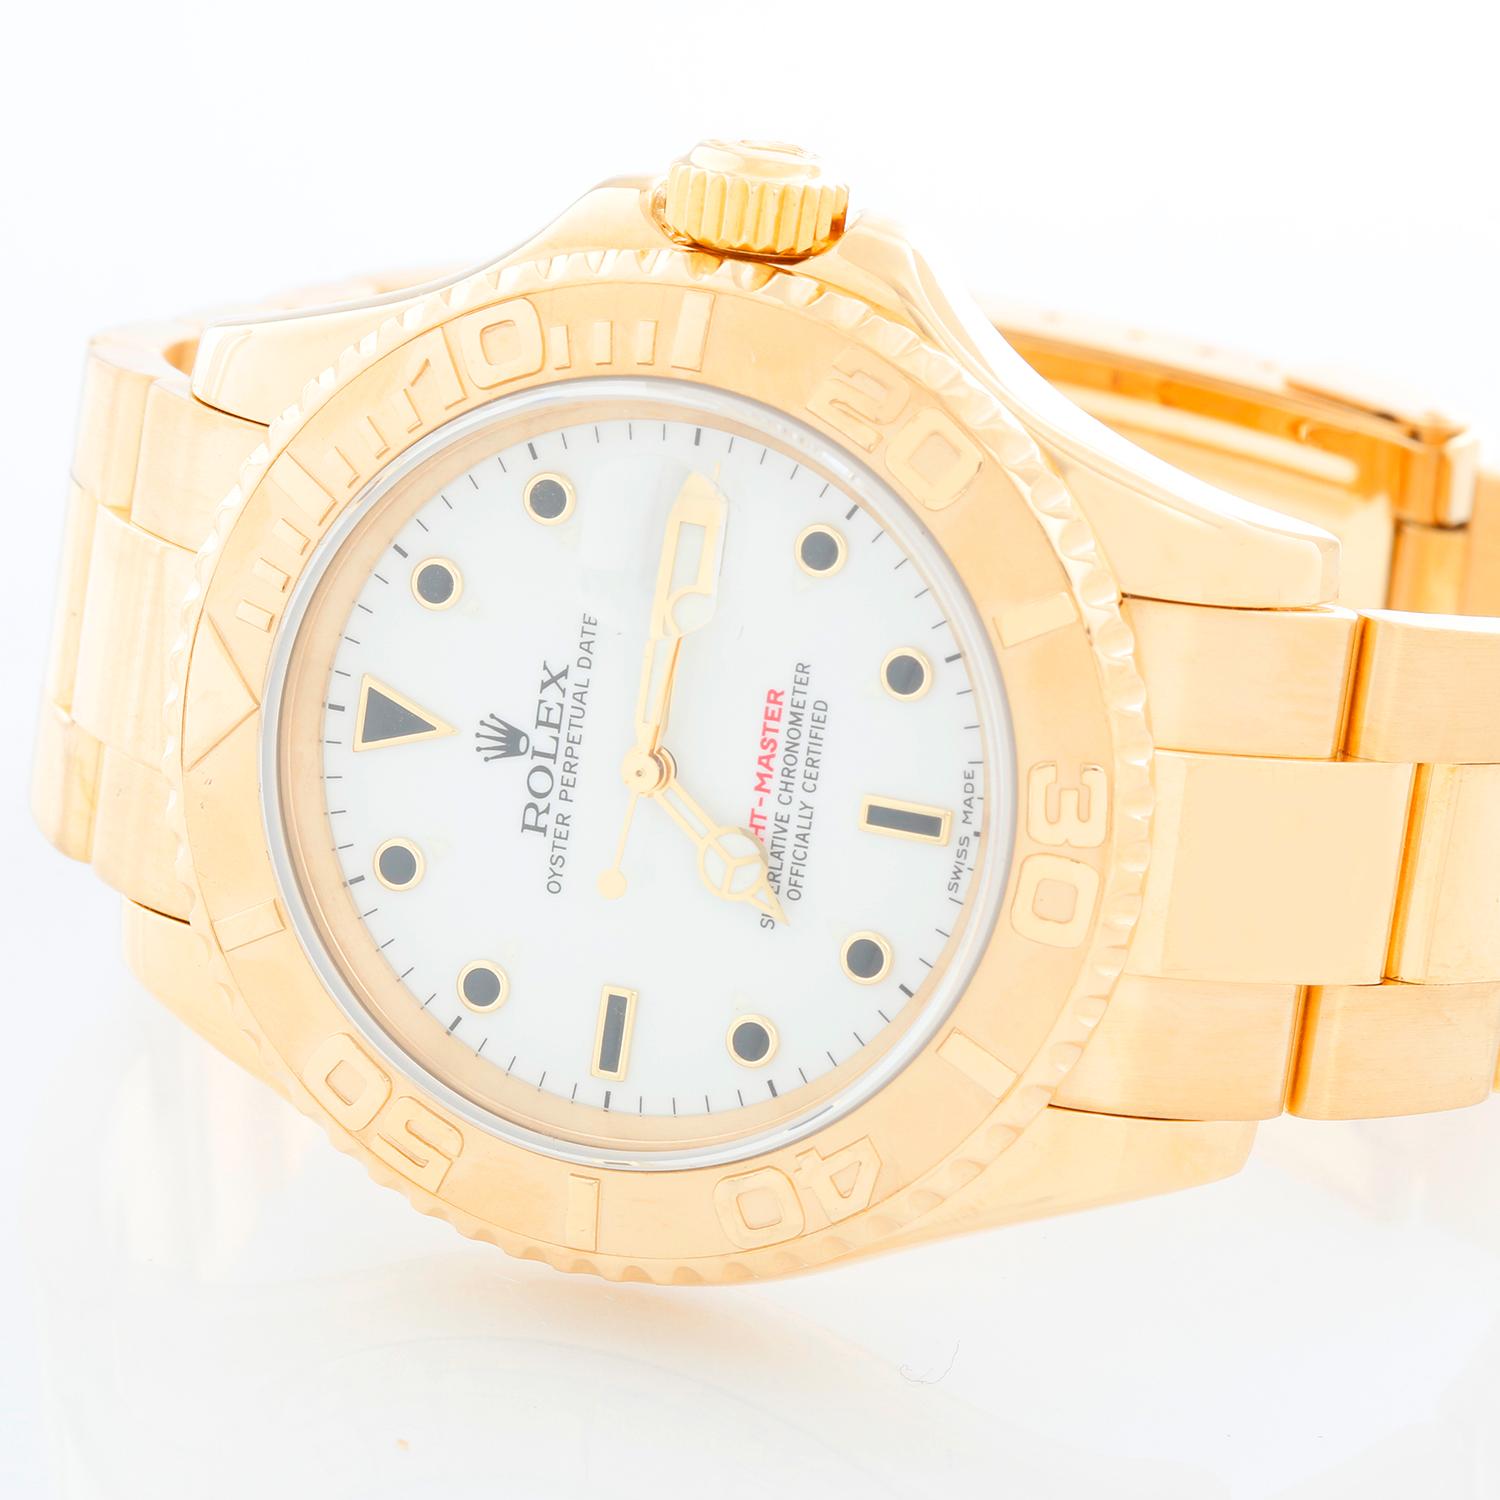 Rolex Yacht-Master Men's 18k Yellow Gold Watch 16628 - Automatic winding, 31 jewels, Quickset, sapphire crystal. 18k yellow gold case (40mm diameter). White dial with black hour markers. 18k yellow gold Oyster bracelet with flip-lock clasp.